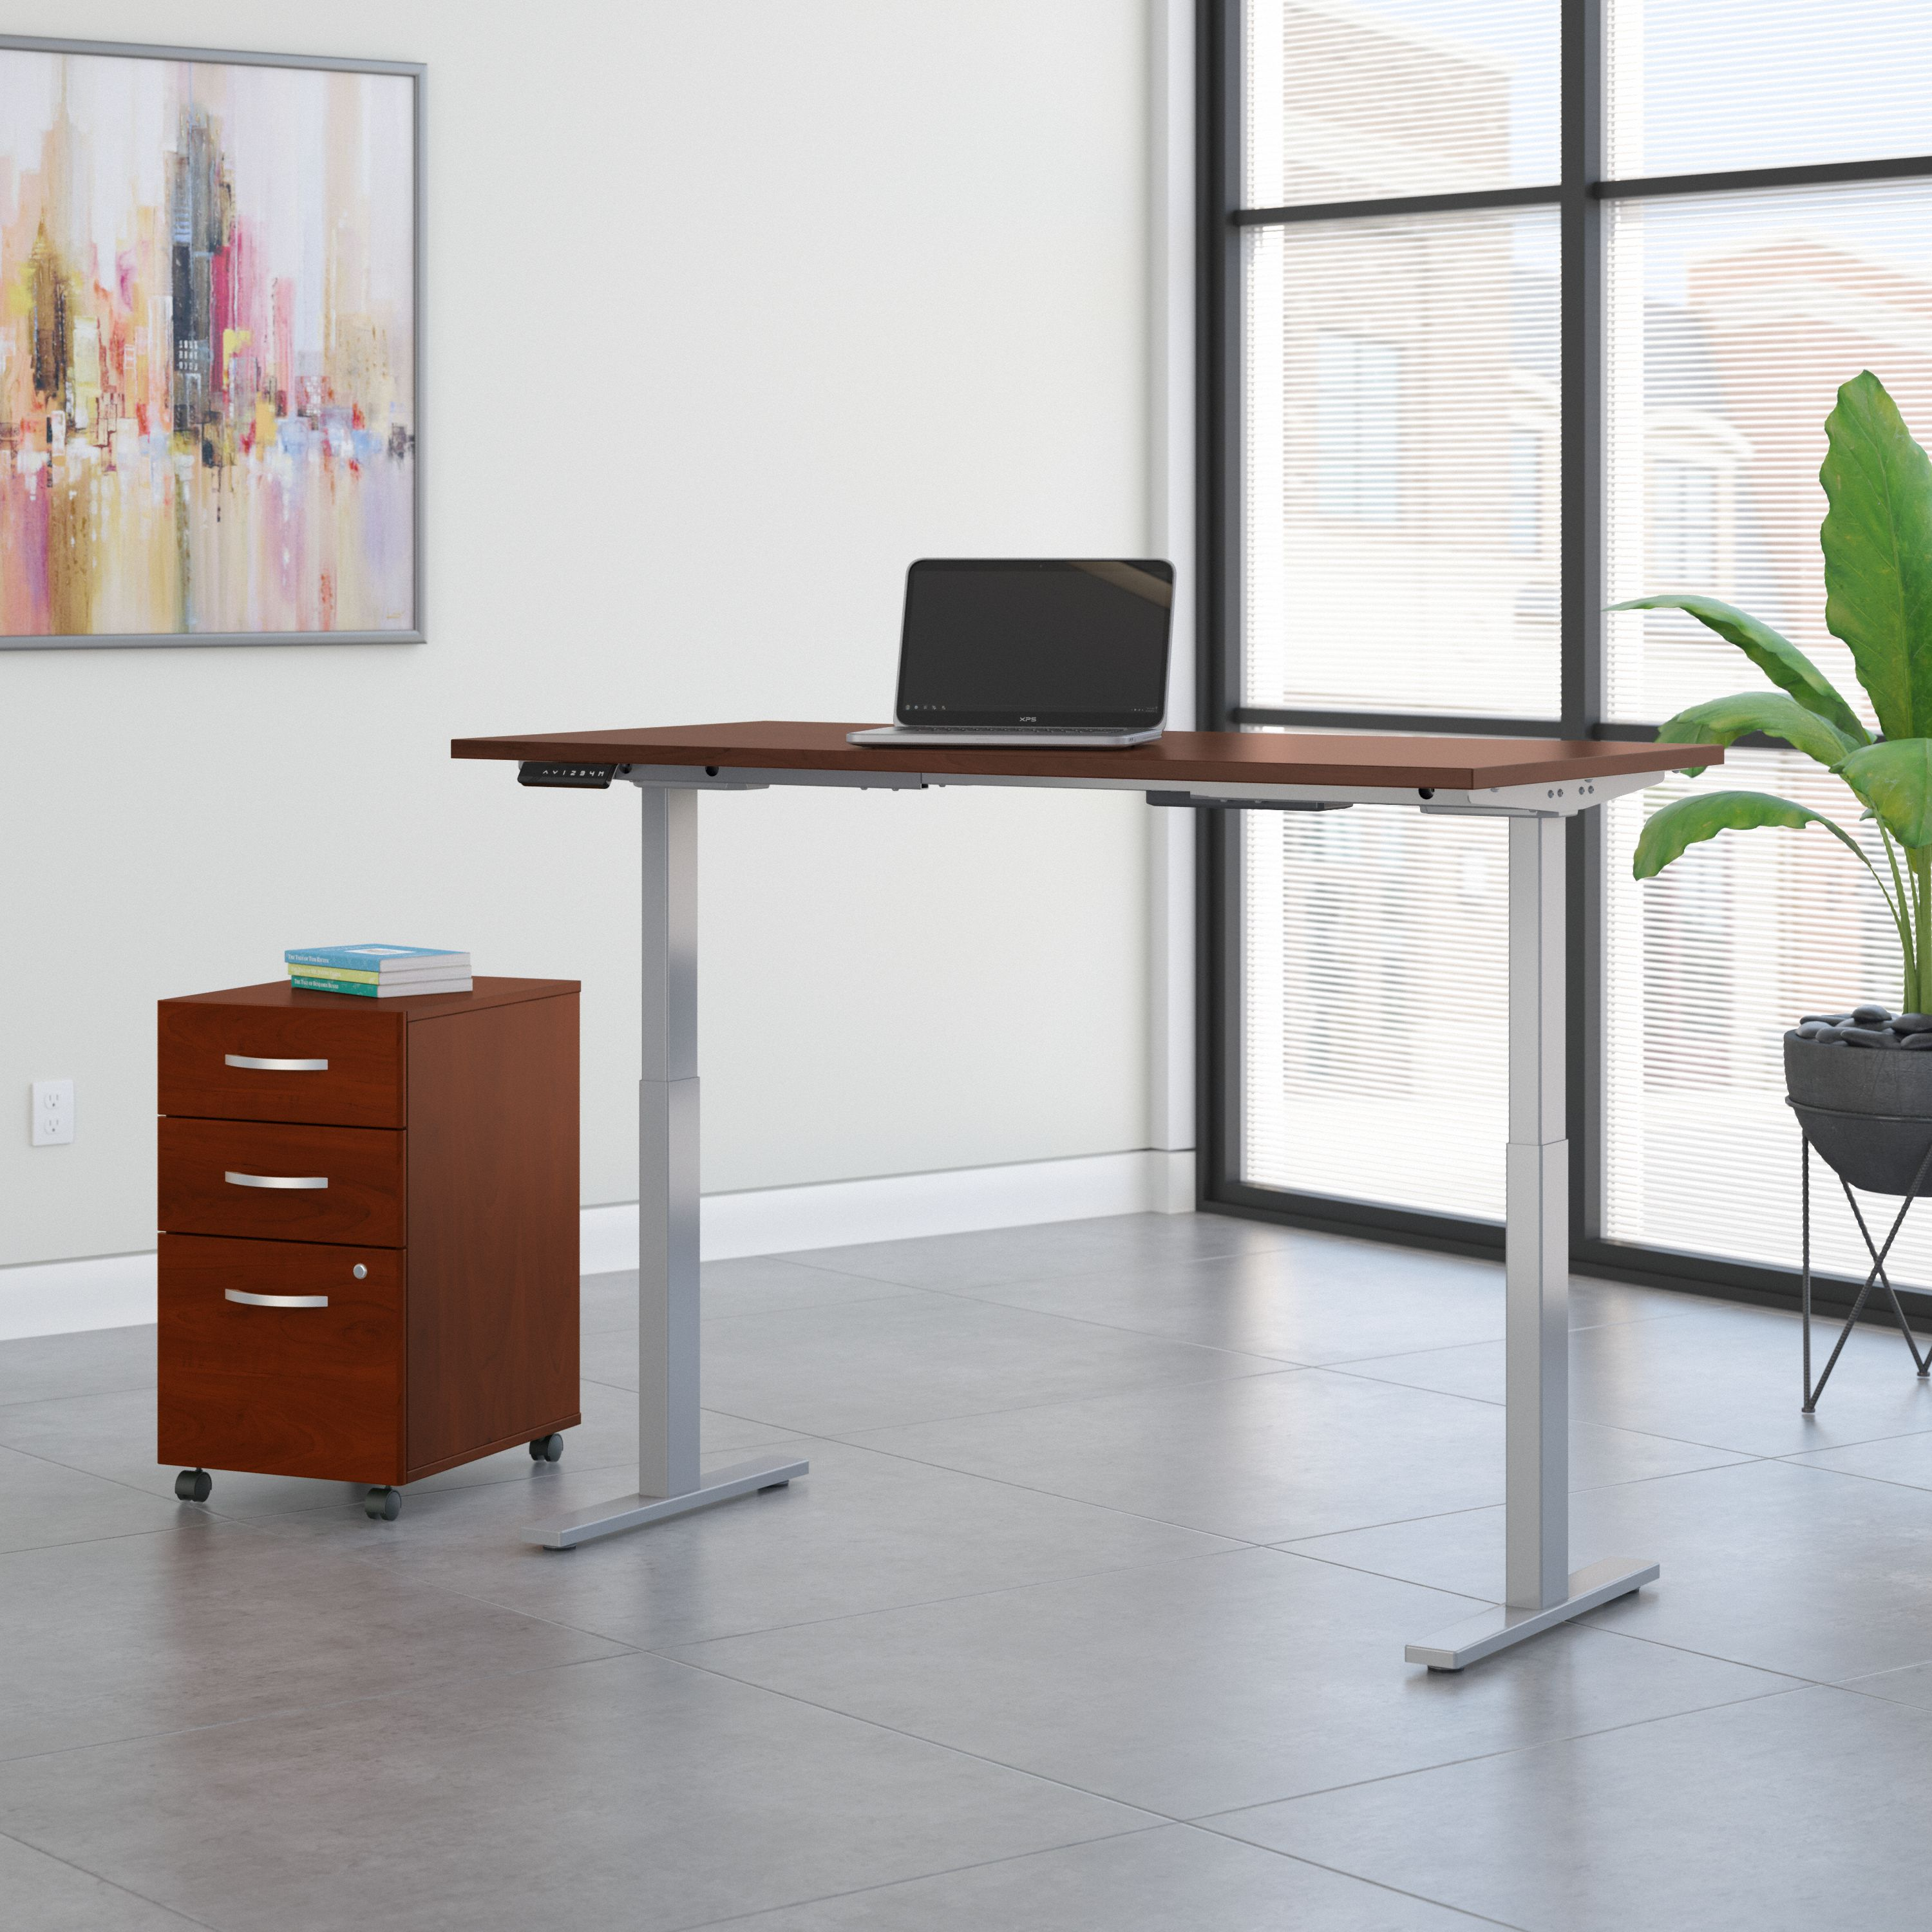 Shop Move 60 Series by Bush Business Furniture 60W x 30D Height Adjustable Standing Desk with Storage 01 M6S011HC #color_hansen cherry/cool gray metallic